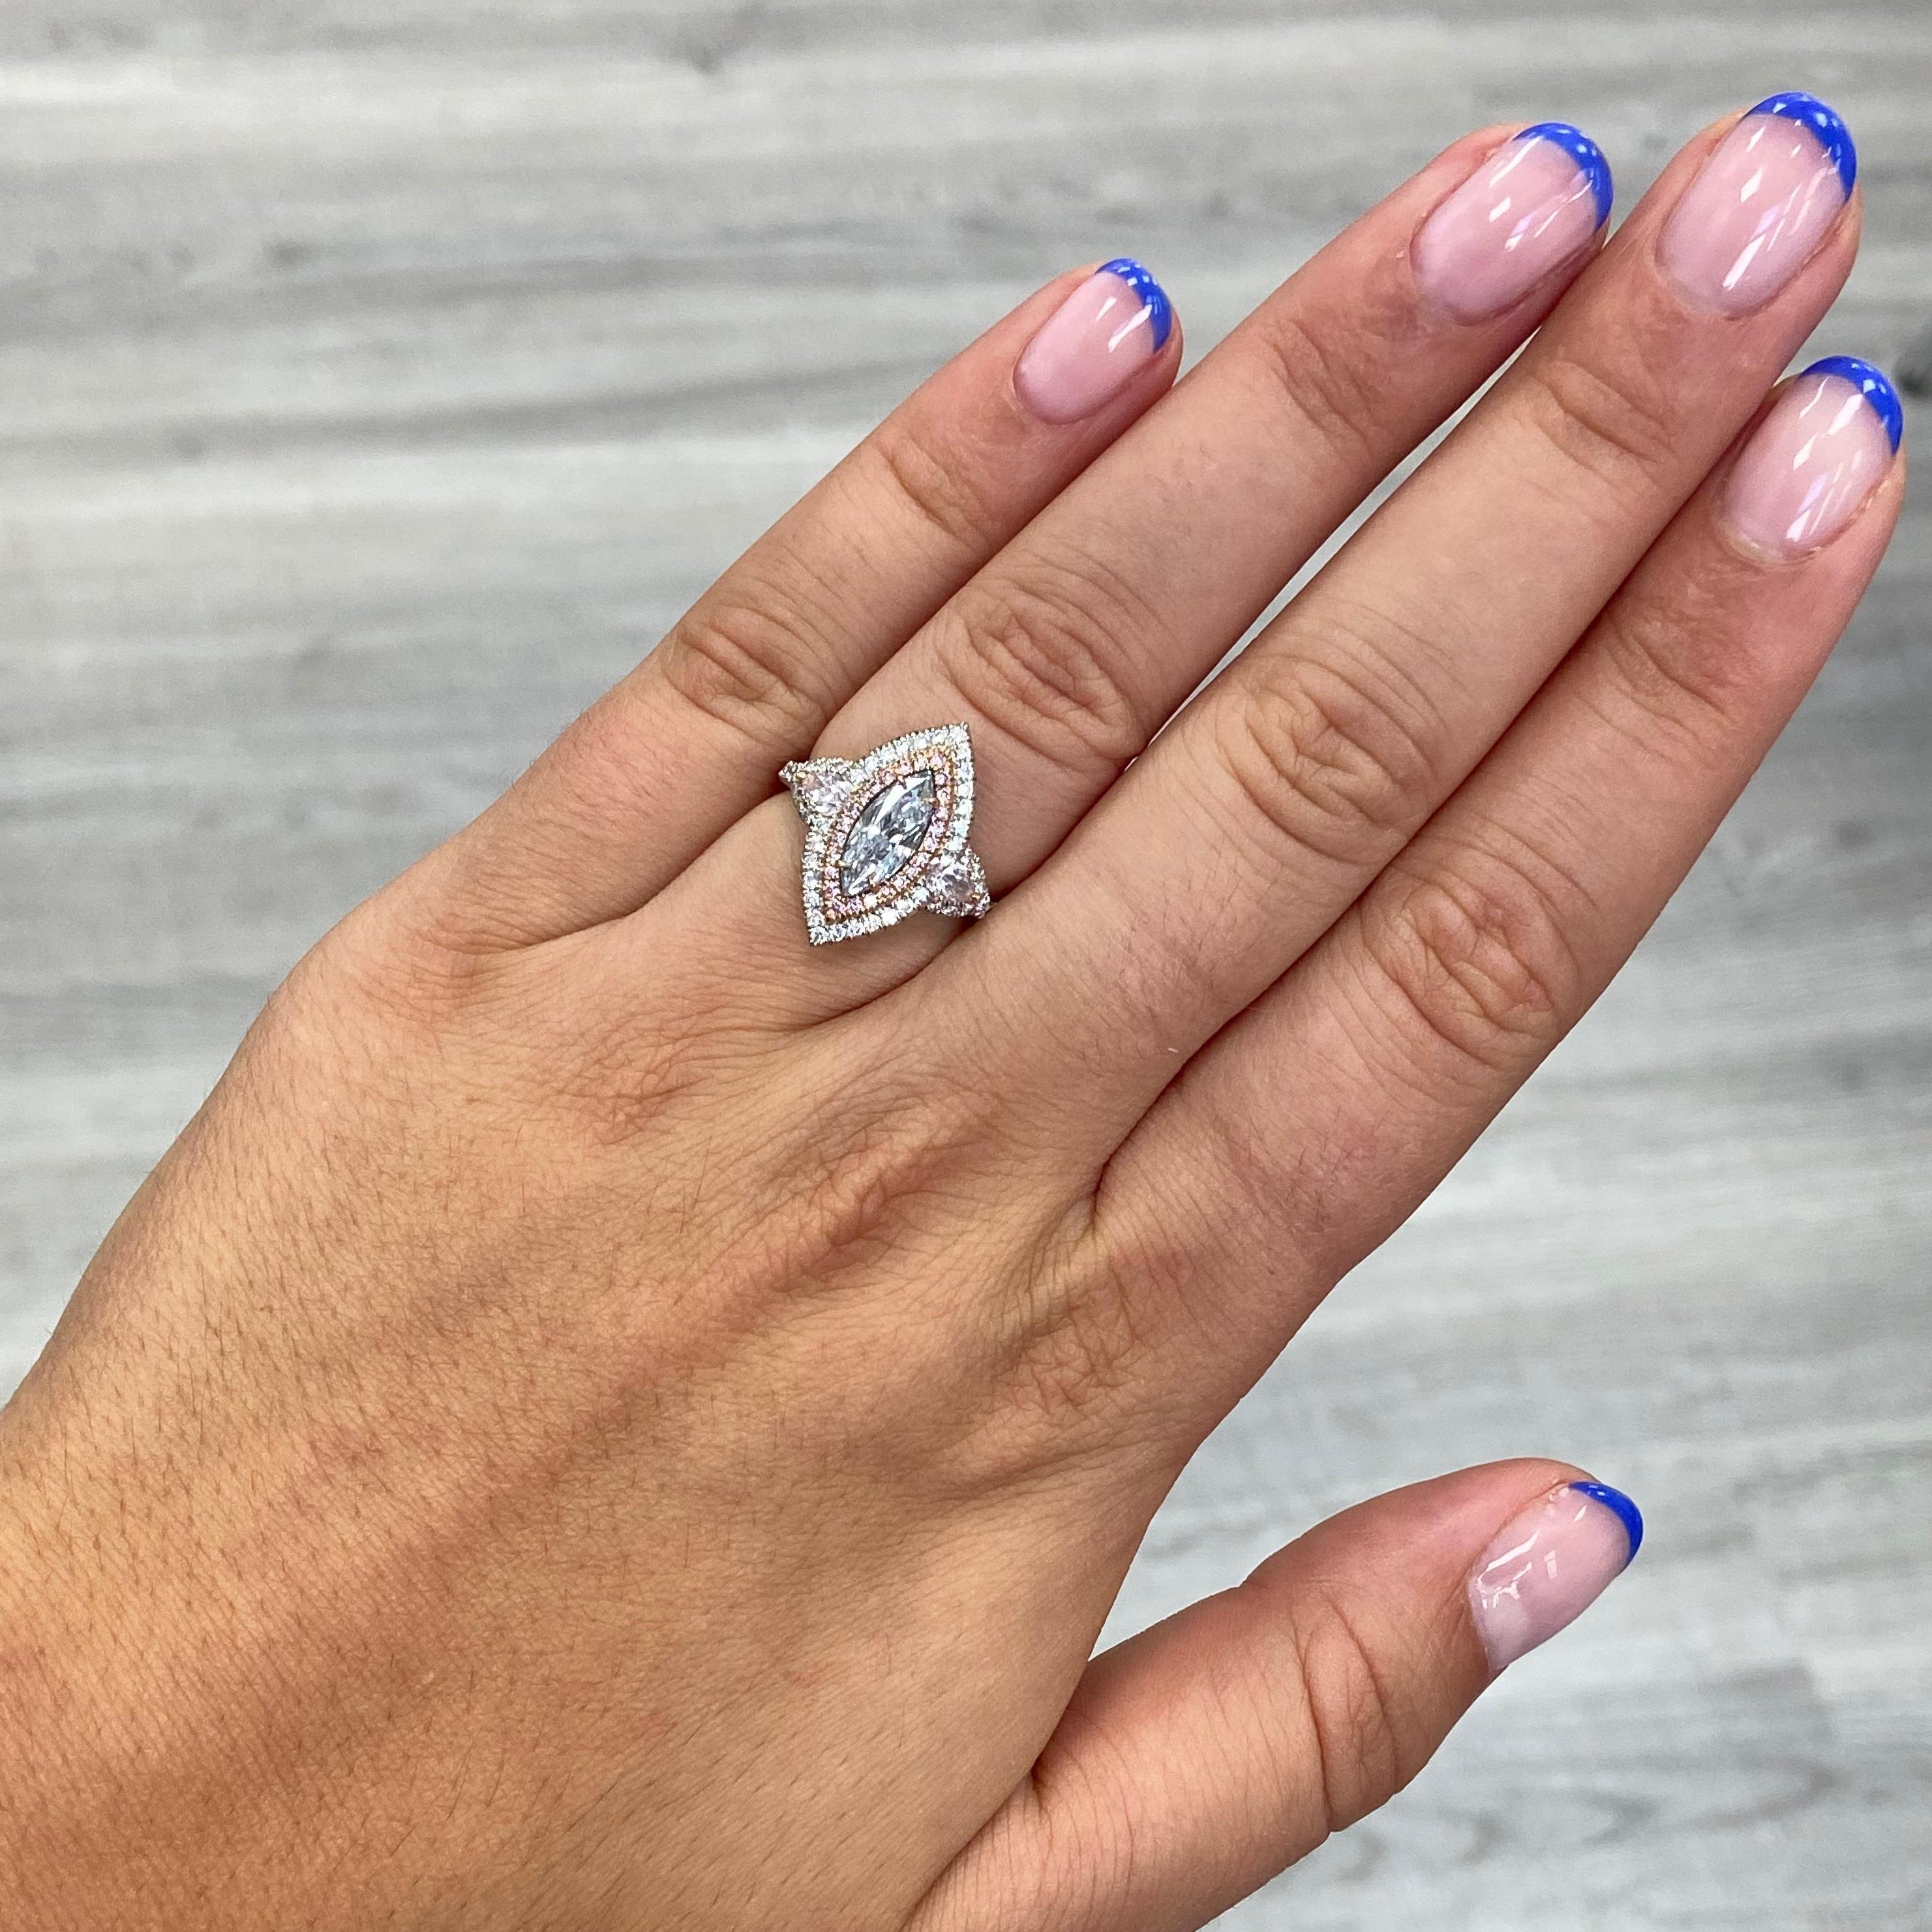 - 1.01 Carat GIA Light Blue Marquise
- SI2 Clarity 
- .37 Carats Pear Pink (Side Stones)
- .12 Carats of Pink Rounds
- .45 Carats of White Rounds
- Total weight 1.95 Carats
- Handmade in NYC
- Size 6.5

Making Extraordinary Attainable with Rare